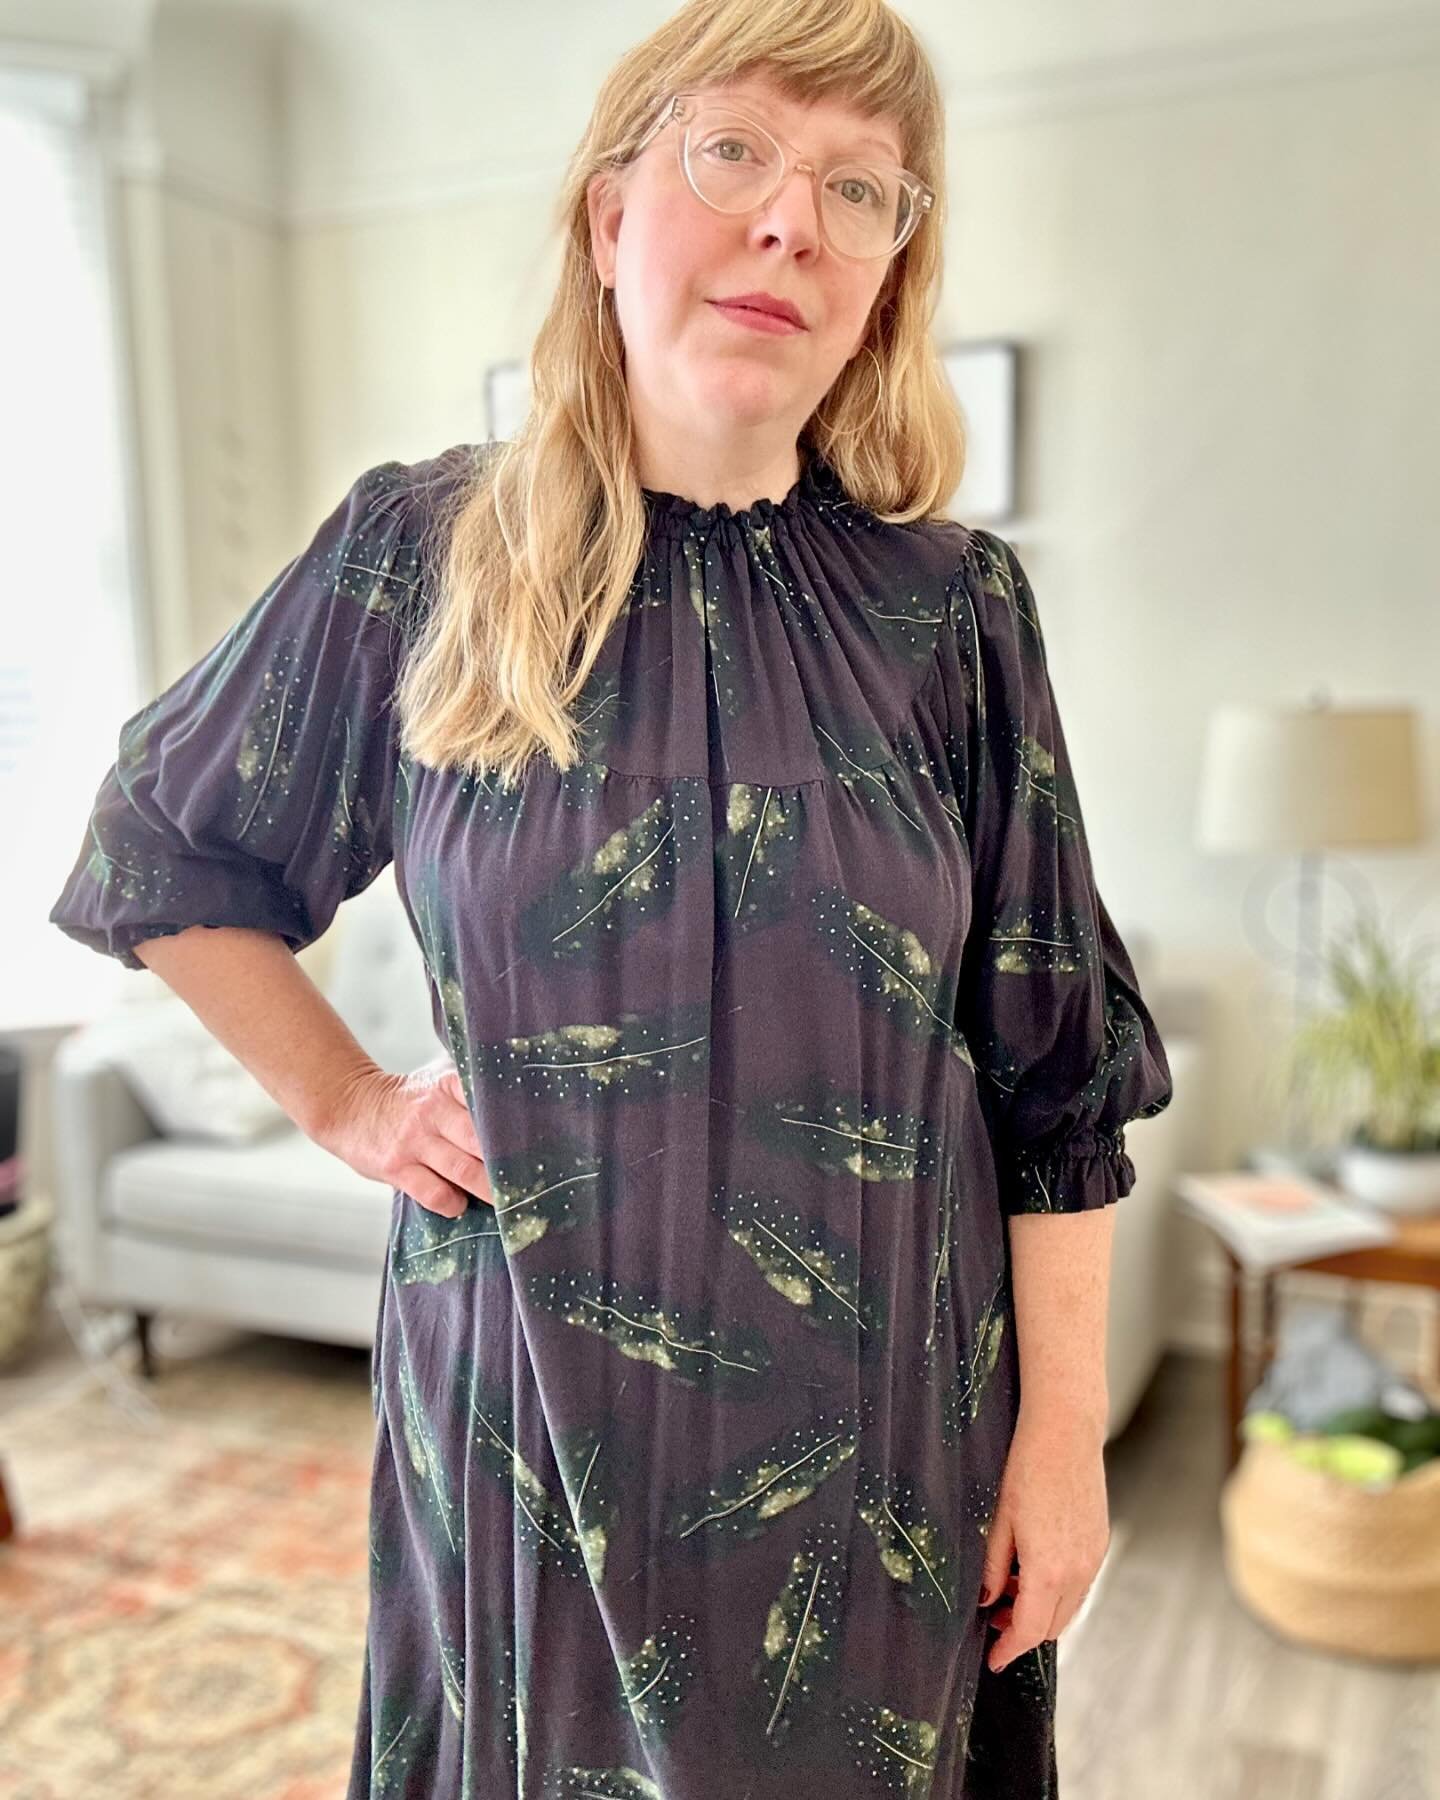 Today&rsquo;s MMM: wearing the Ramona Dress by @spaghetti_western_sewing in rayon from @workroomsocial for a day of teaching and art viewing later. Wanna make this dress with me? I&rsquo;m teaching it as a workshop and there are a few spots left! Lin